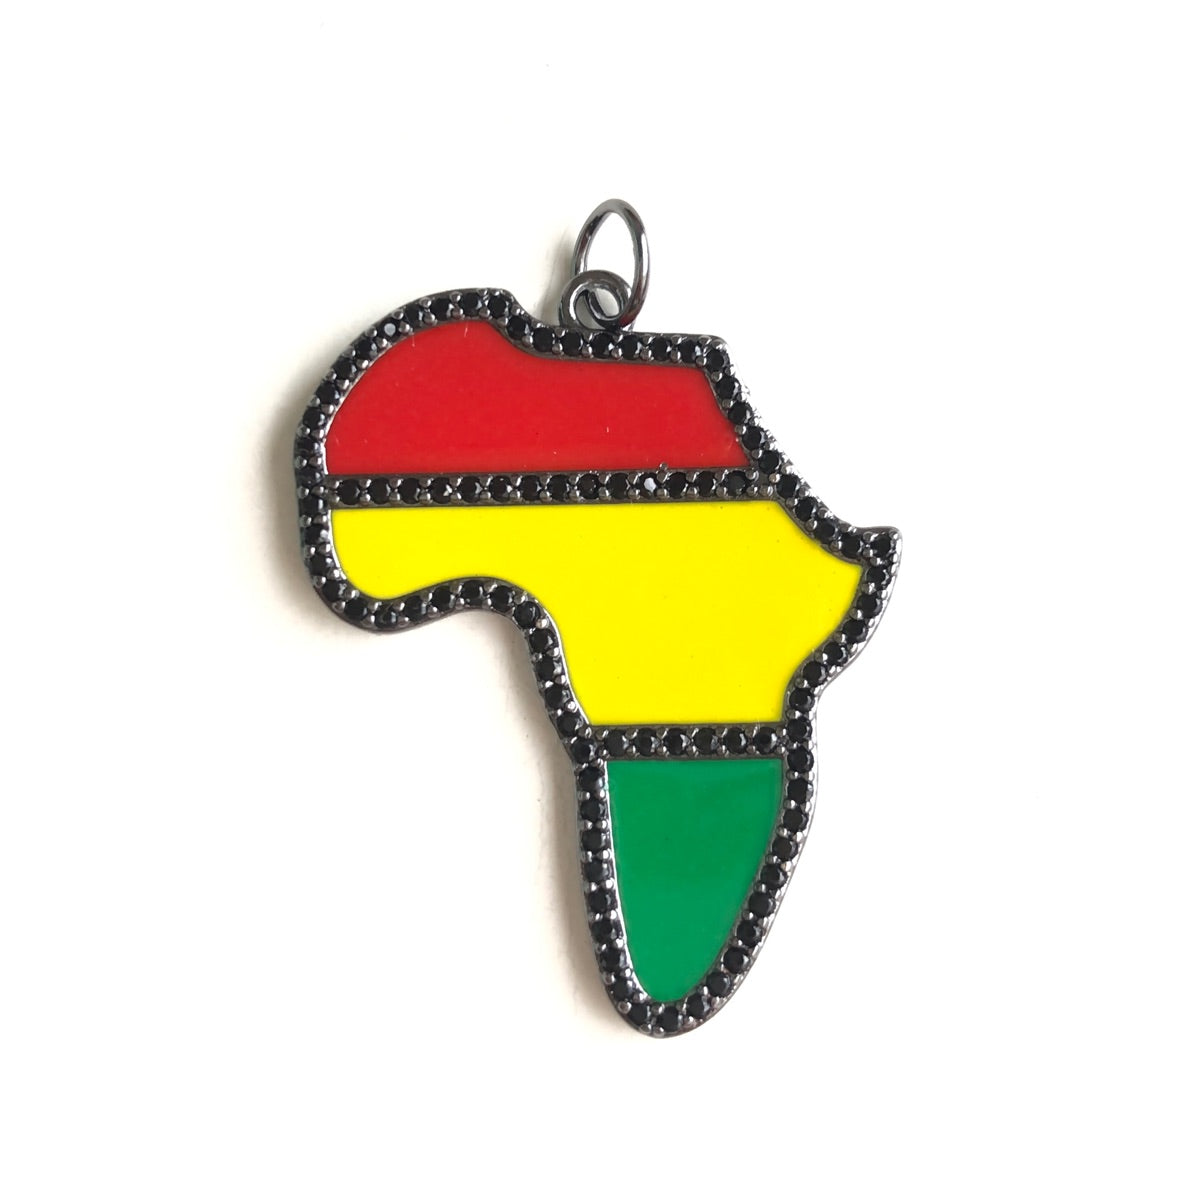 10pcs/lot Red Yellow Green Enamel Africa Map CZ Pave Charms for Black History Month Juneteenth Awareness Black on Black CZ Paved Charms Juneteenth & Black History Month Awareness New Charms Arrivals Charms Beads Beyond